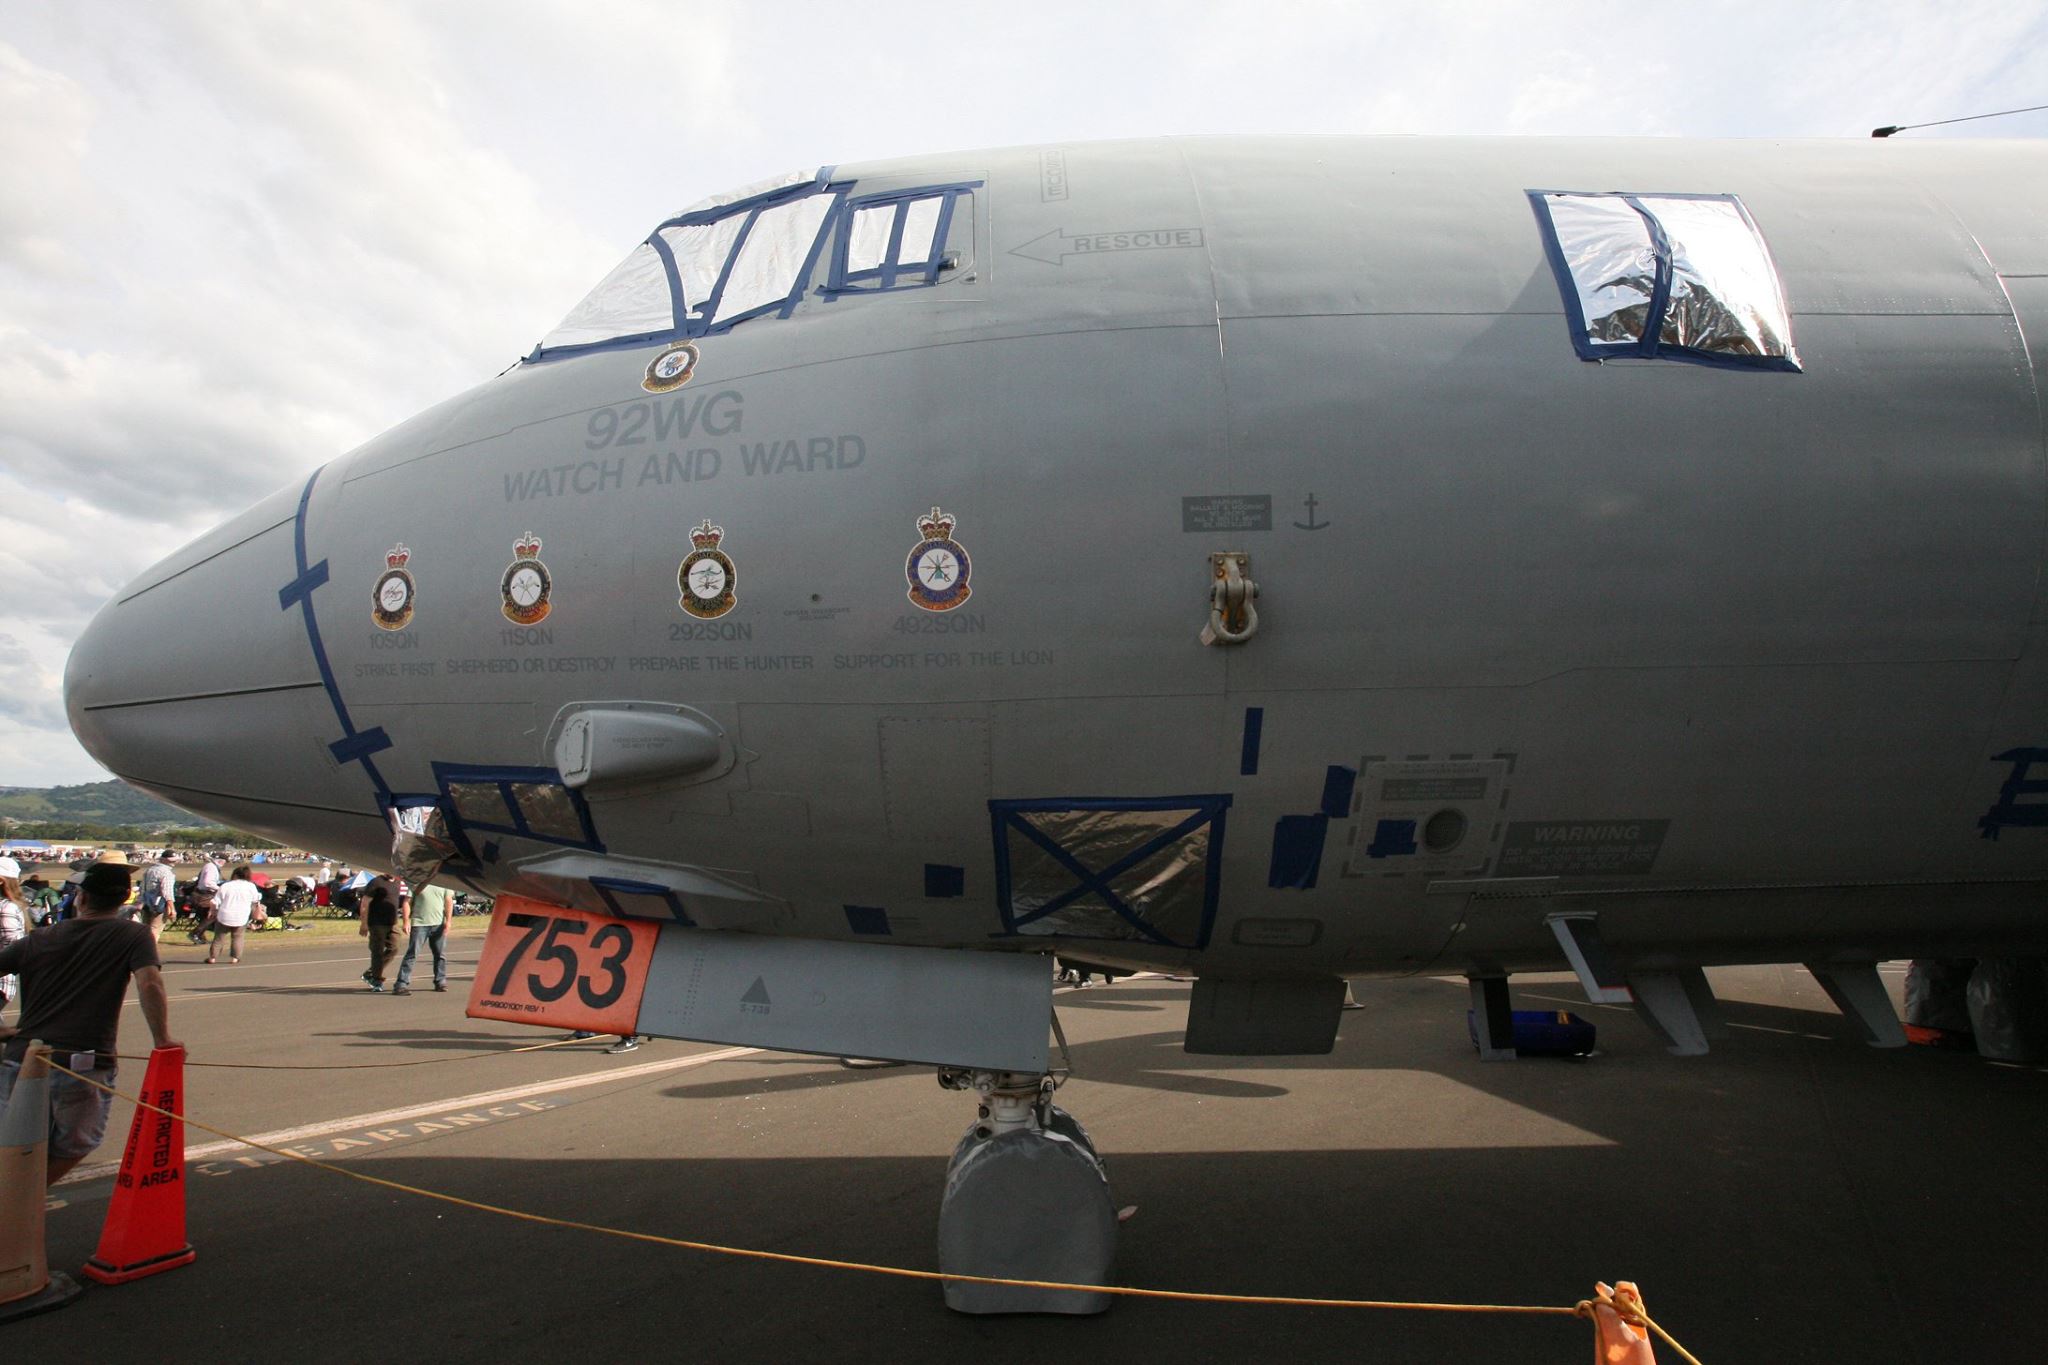 A closeup of A9-753 showing her squadron heritage. Note the tape covering panels lines and the silver foil window coverings. These were put in place to protect the integrity of the aircraft while the Australian Department of Defense sought permission to formally hand over ownership to HARS. The museum will soon get to work preparing the Orion to fly once more. (photo by Phil Buckley) 